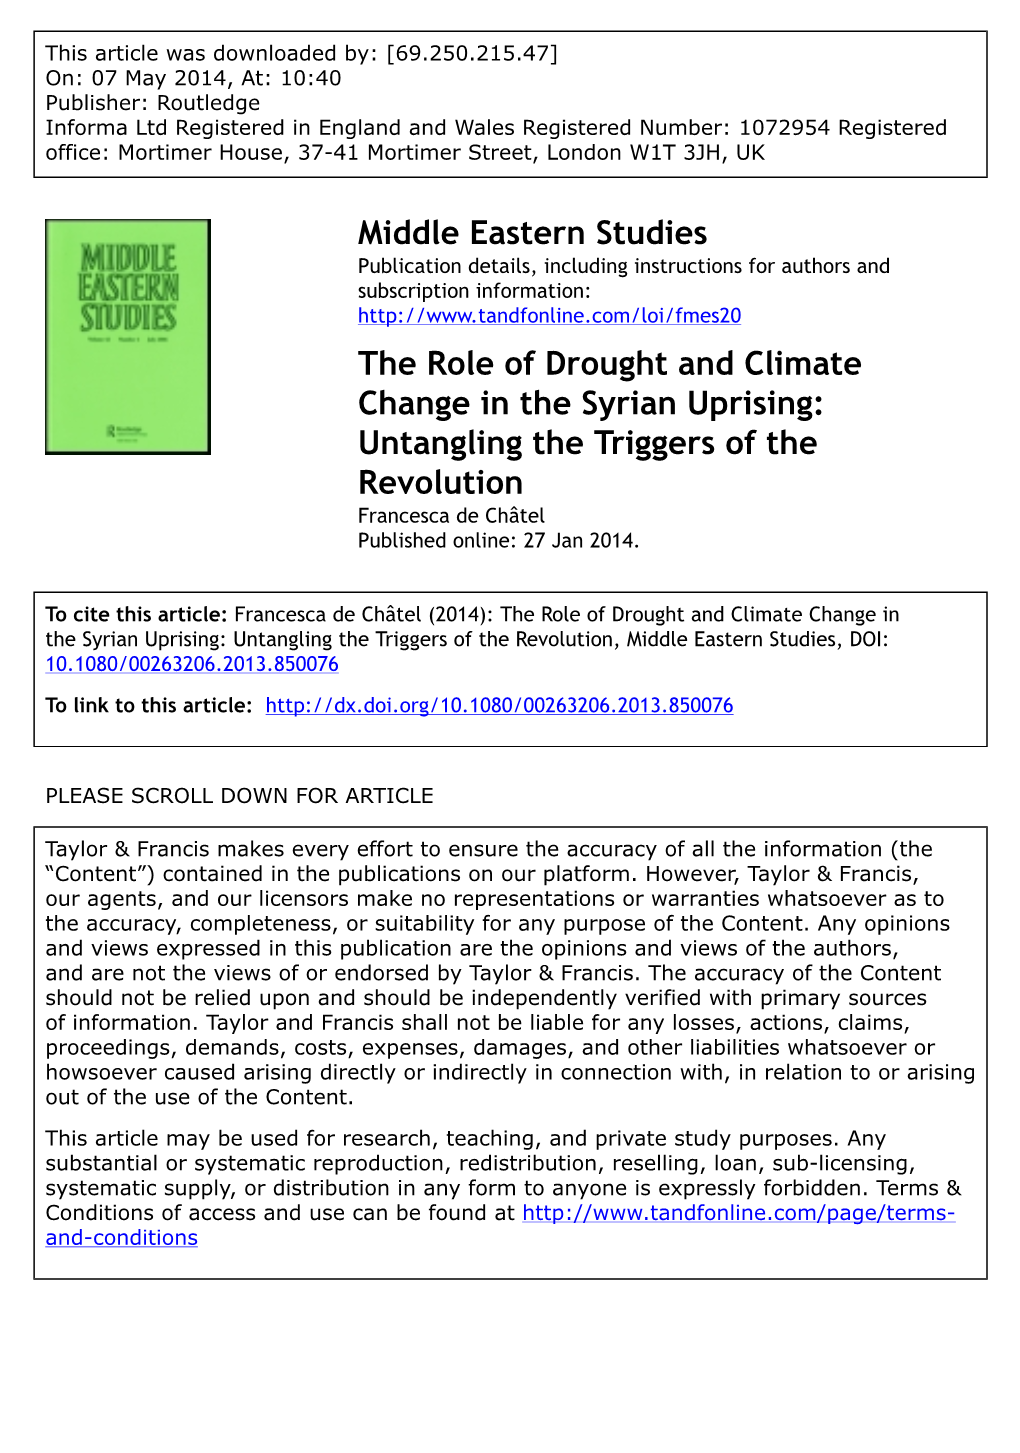 The Role of Drought and Climate Change in the Syrian Uprising: Untangling the Triggers of the Revolution Francesca De Châtel Published Online: 27 Jan 2014